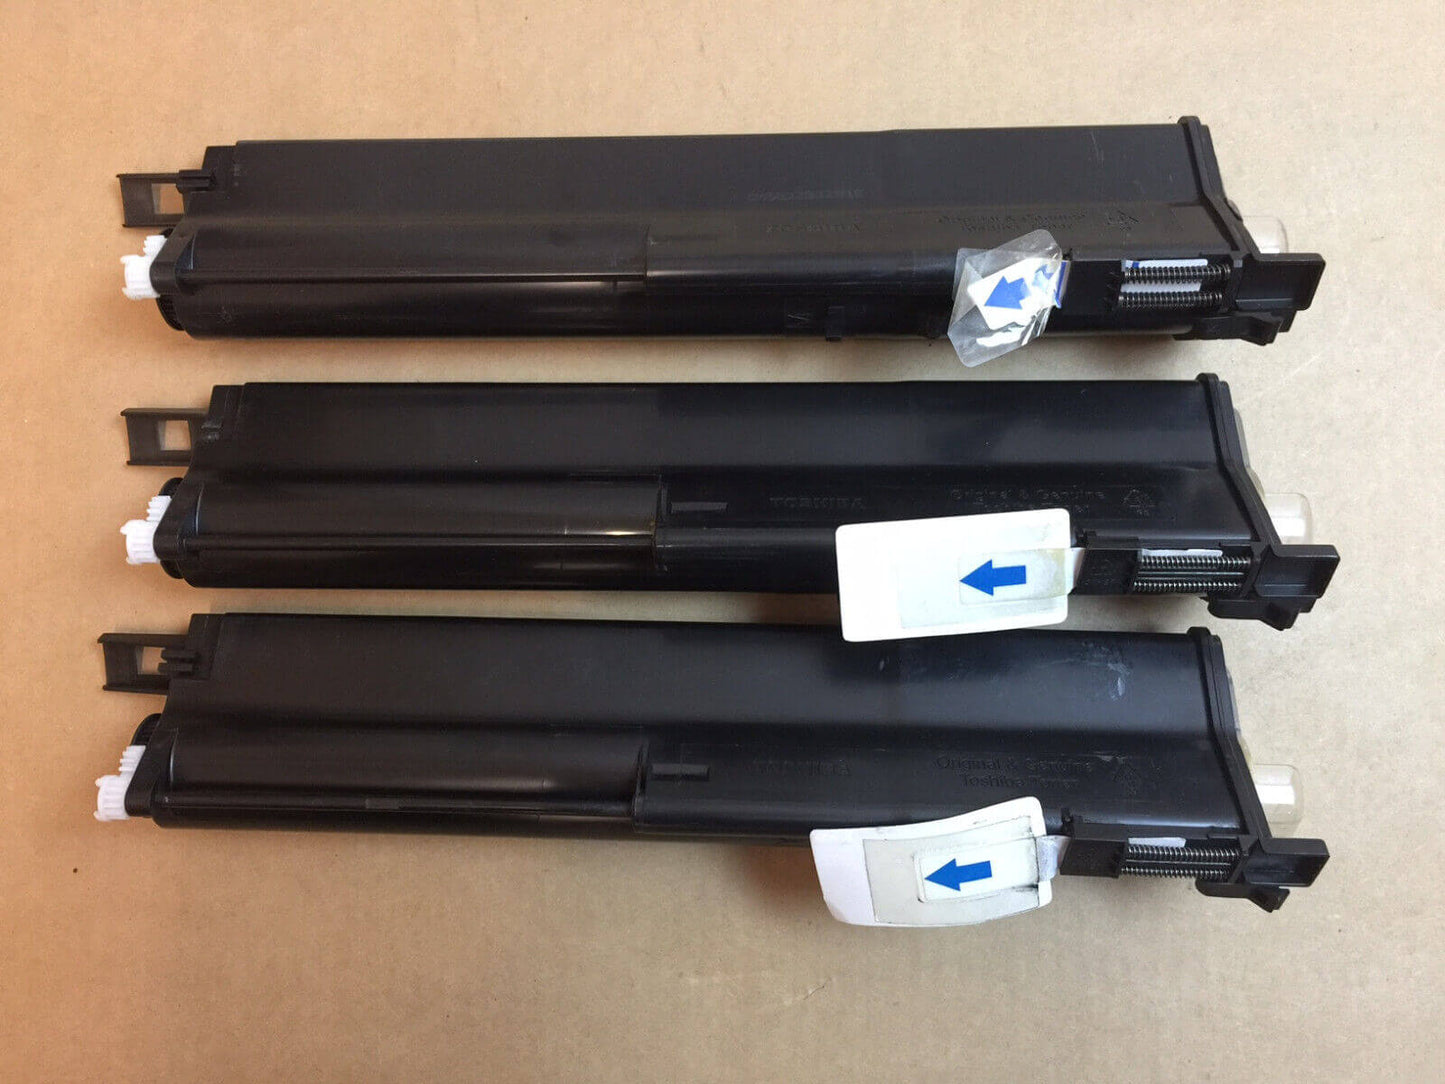 Toshiba T-3511 (M,Y) Toner Cartridges for e-Studio 3511/4511 SAME DAY SHIPPING!! - copier-clearance-center